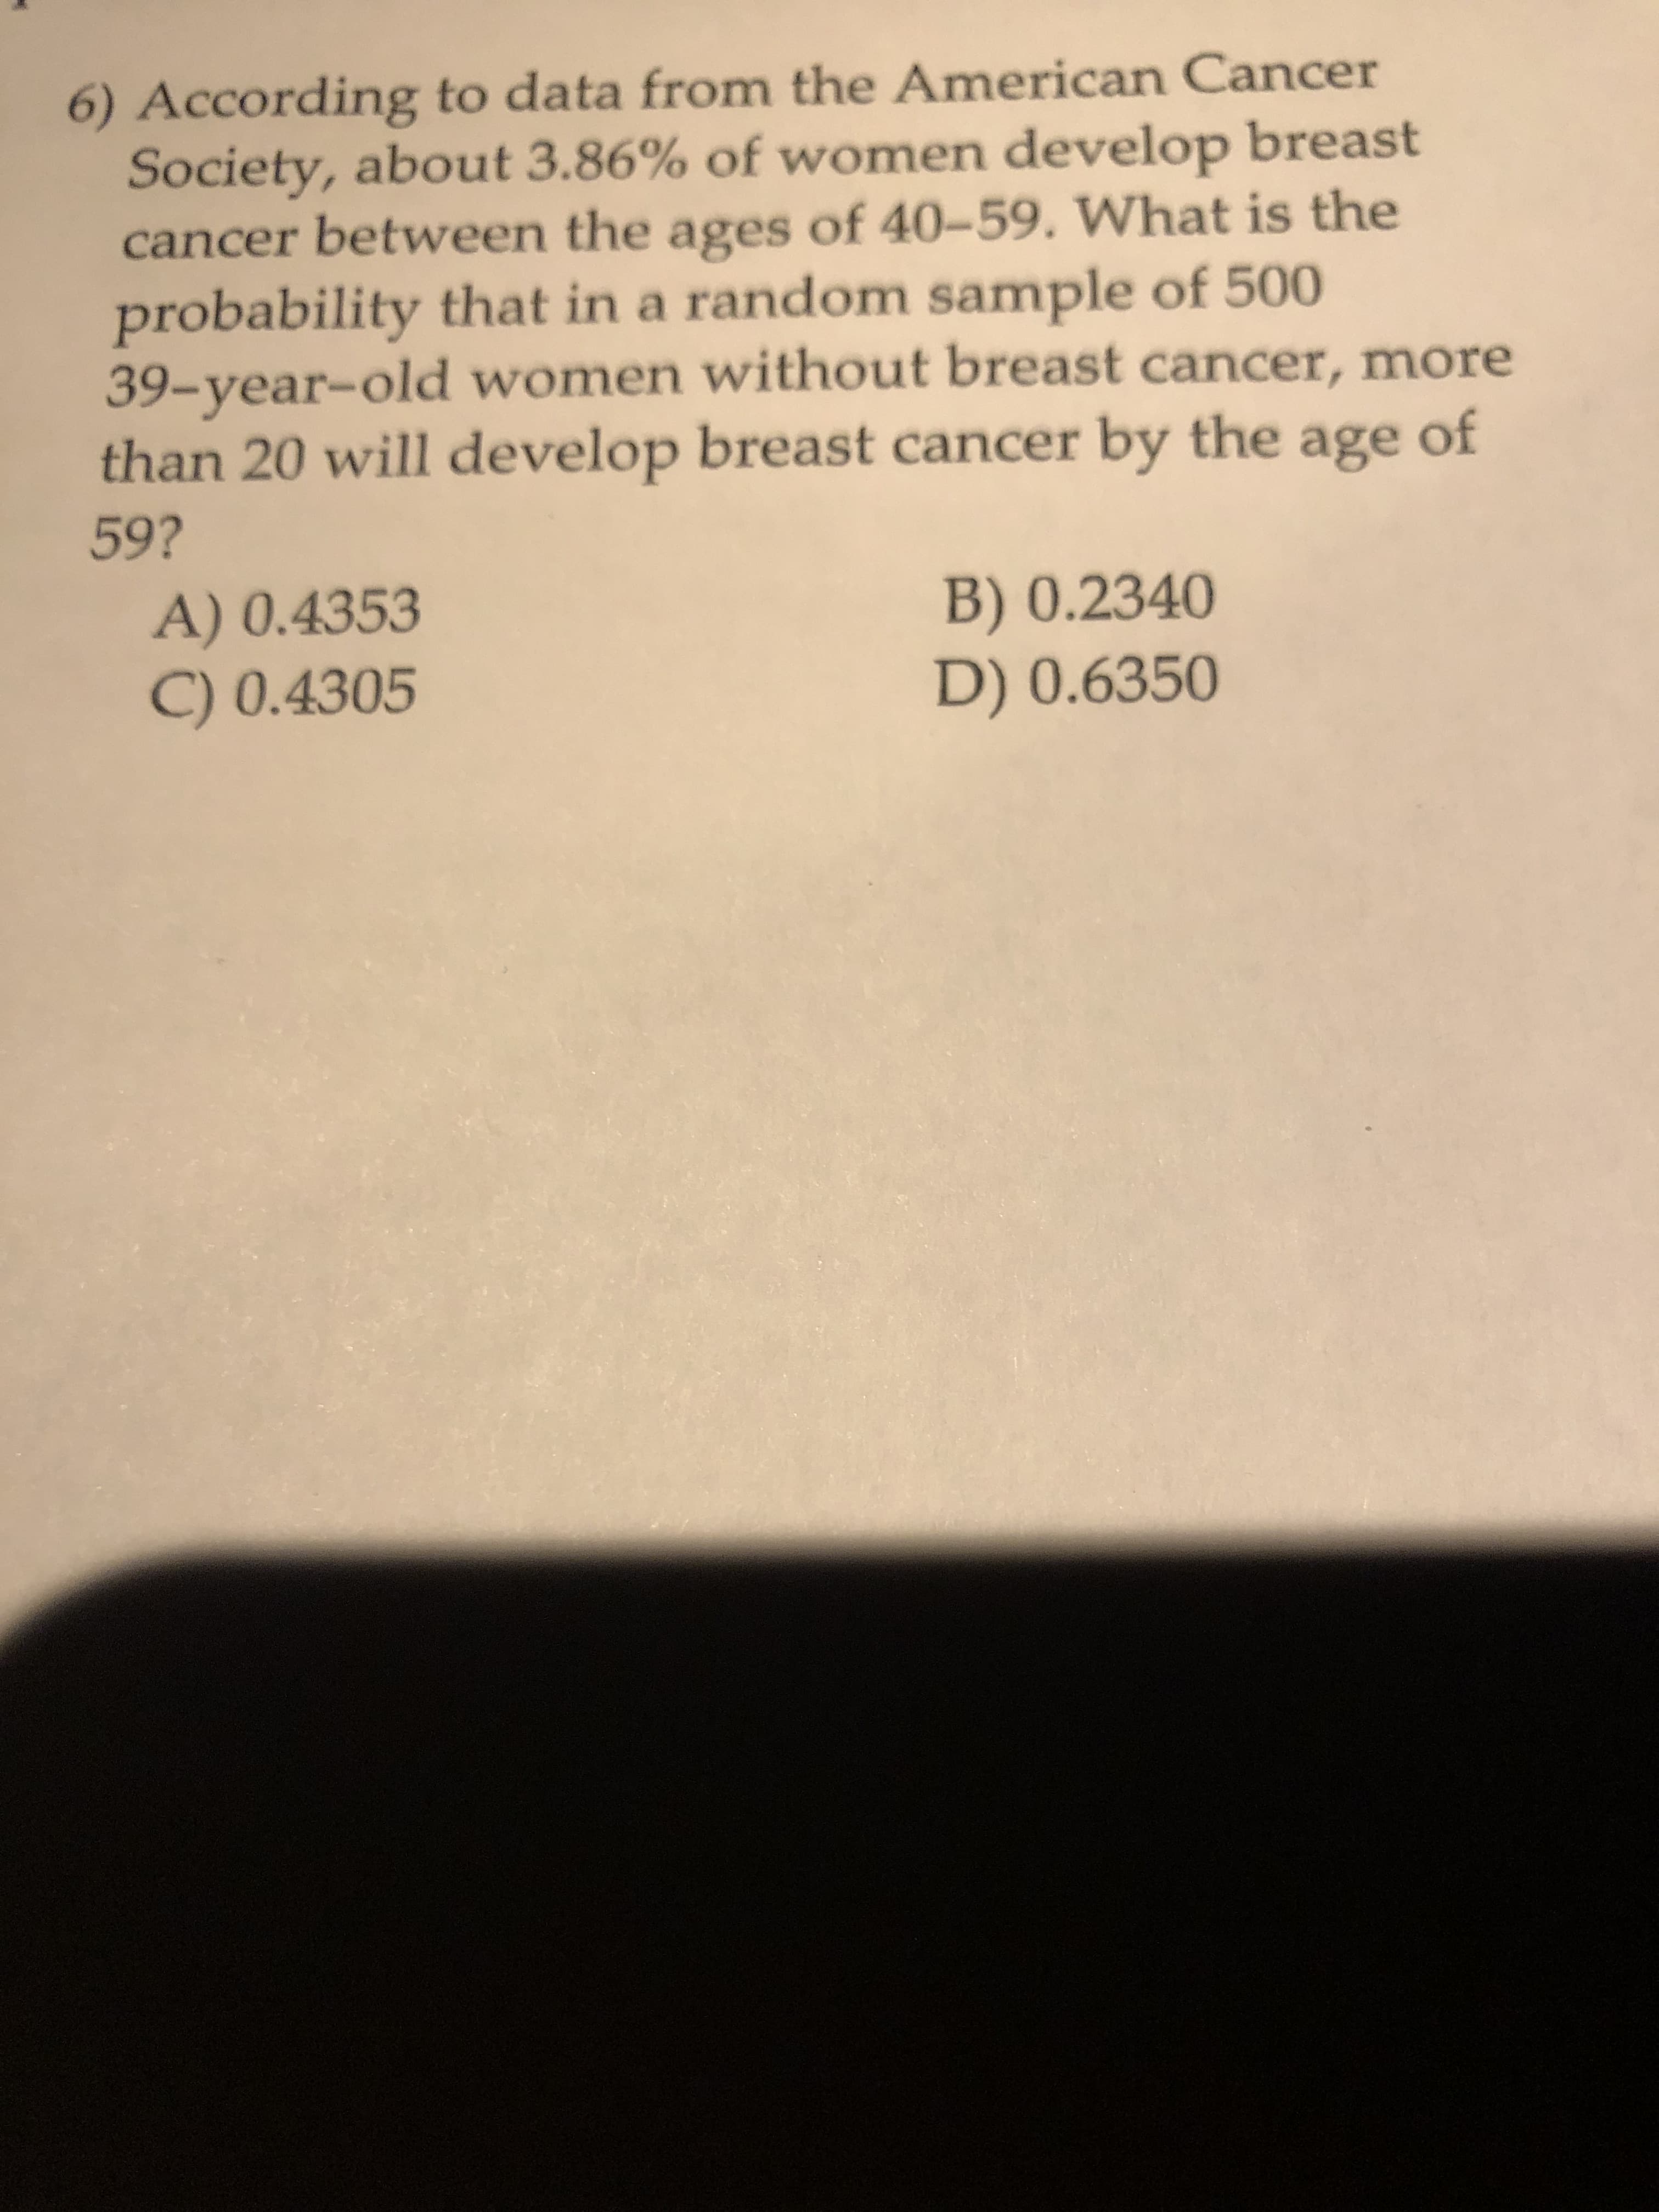 6) According to data from the American Cancer
Society, about 3.86% of women develop breast
cancer between the ages of 40-59. What is the
probability that in a random sample of 500
39-year-old women without breast cancer, more
than 20 will develop breast cancer by the age
of
59?
A) 0.4353
C) 0.4305
B) 0.2340
D) 0.6350
